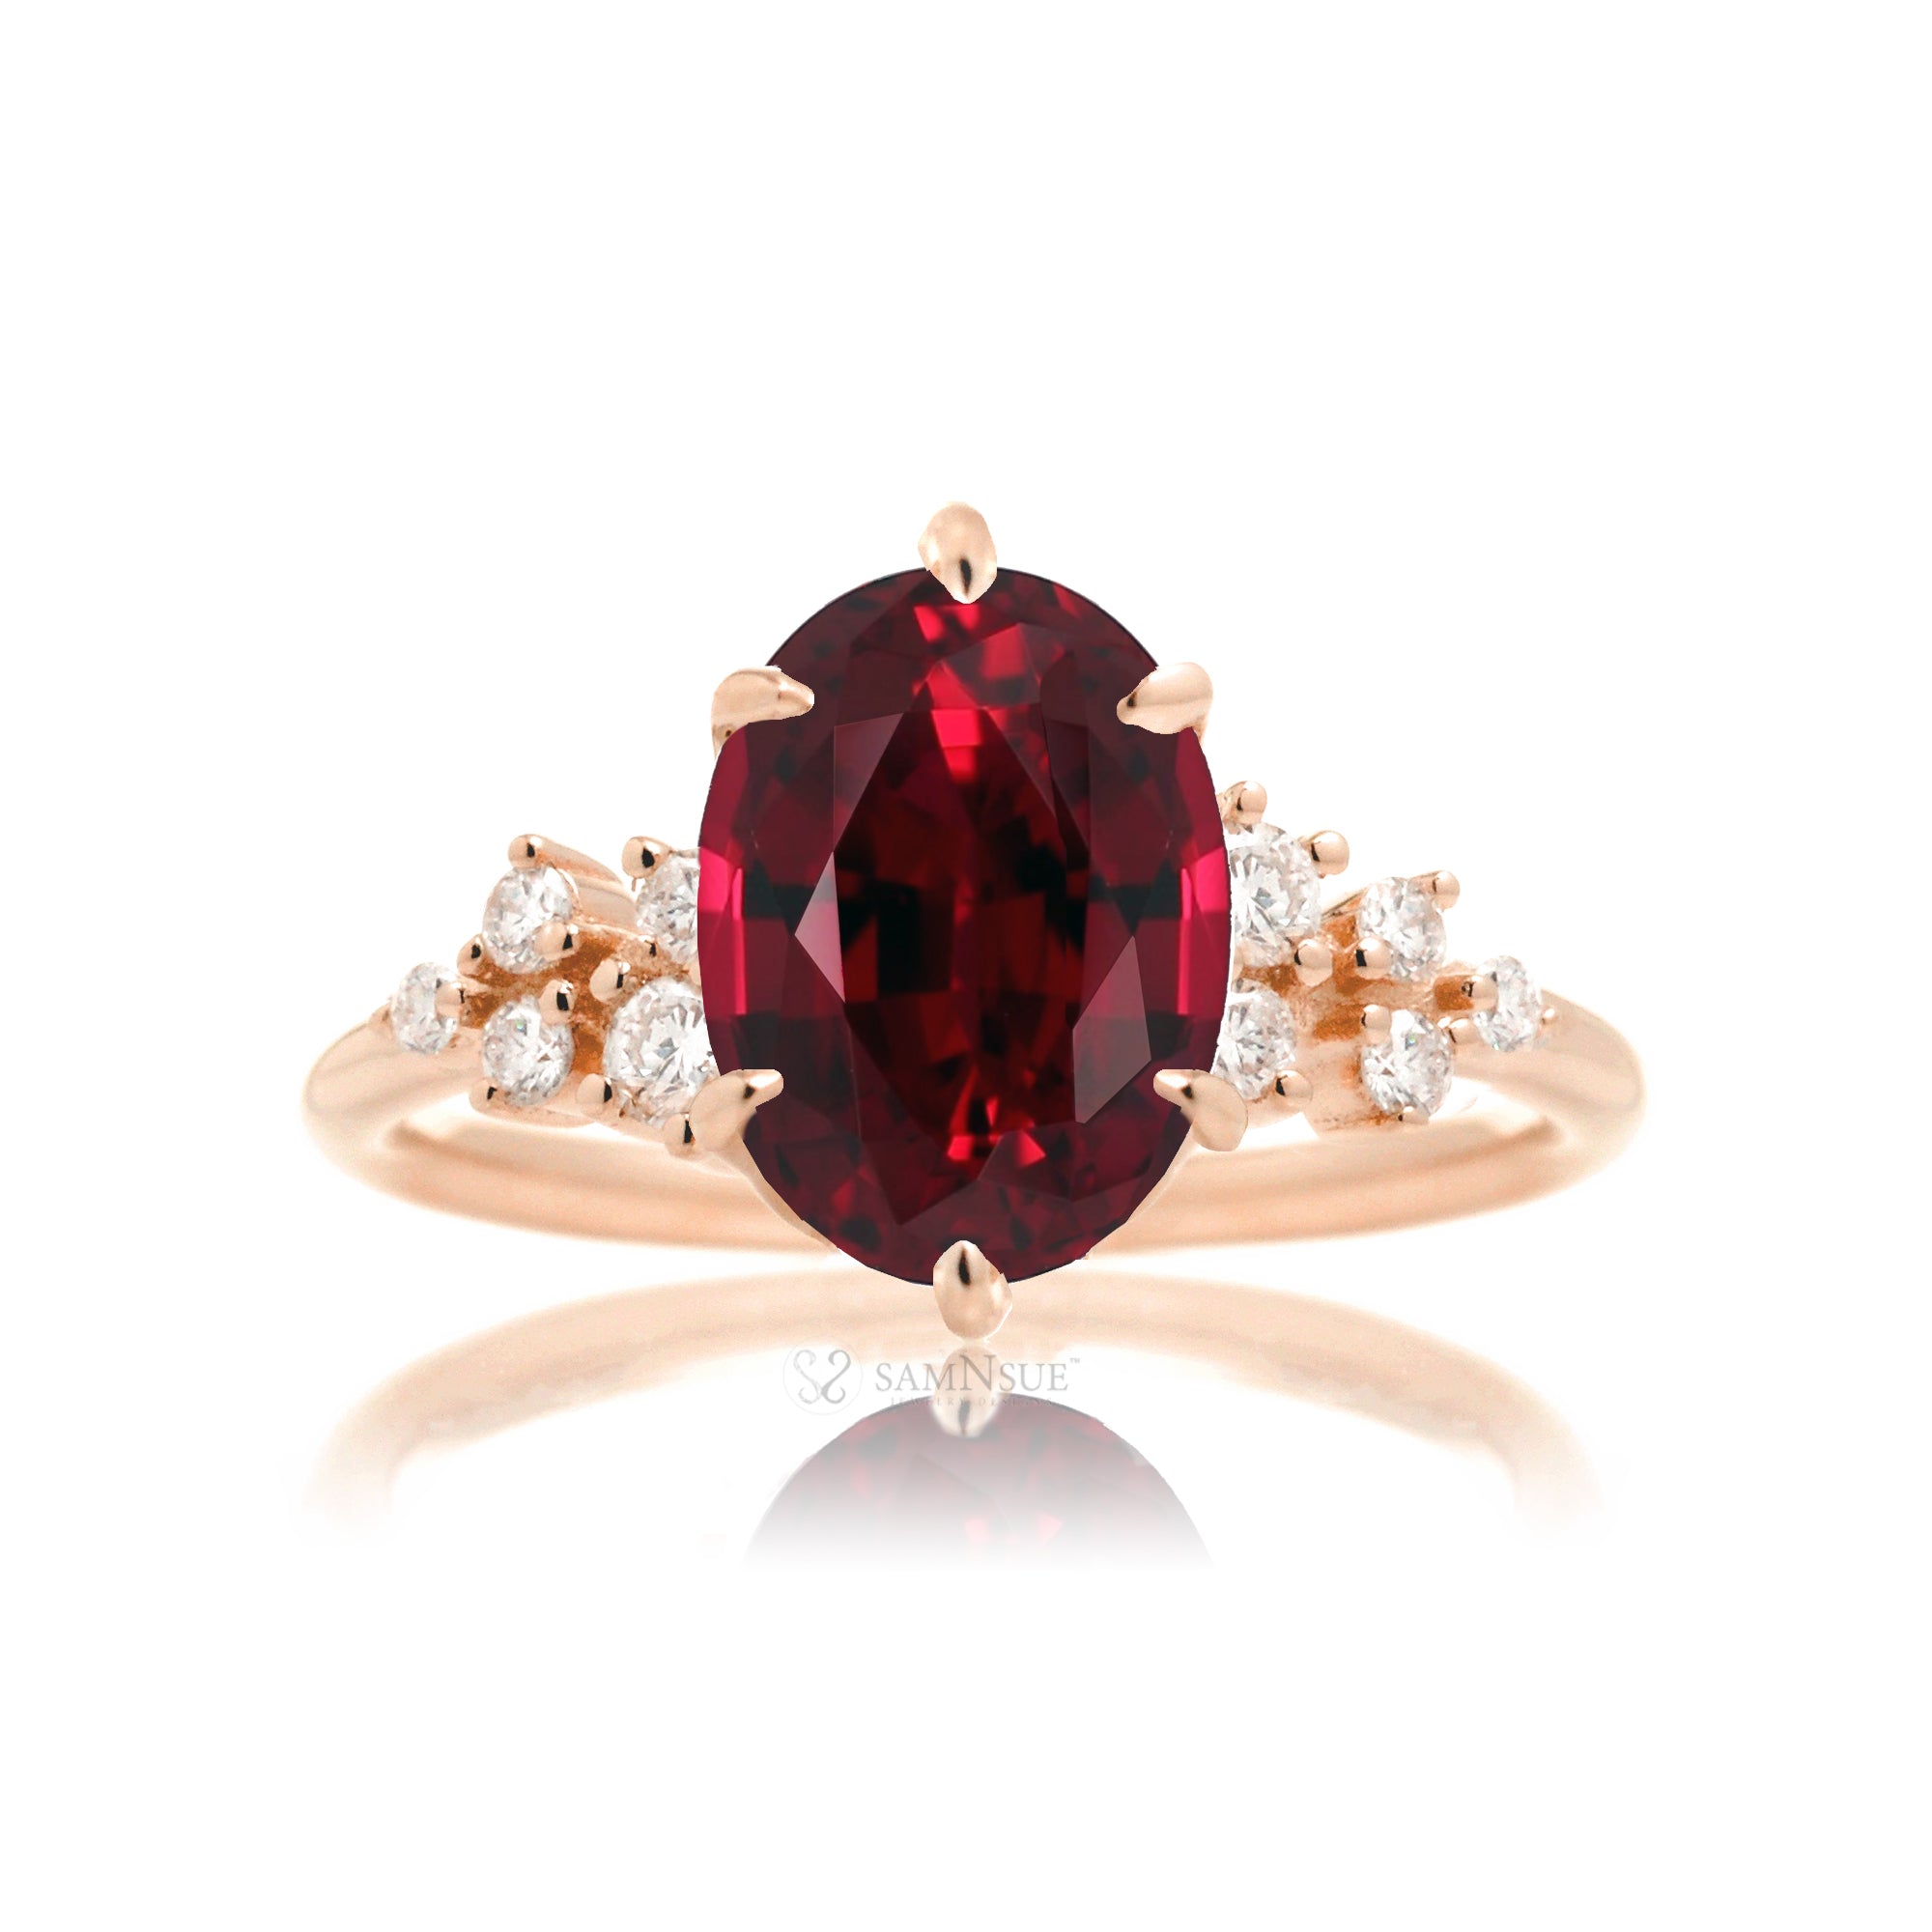 Oval ruby diamond engagement ring in rose gold